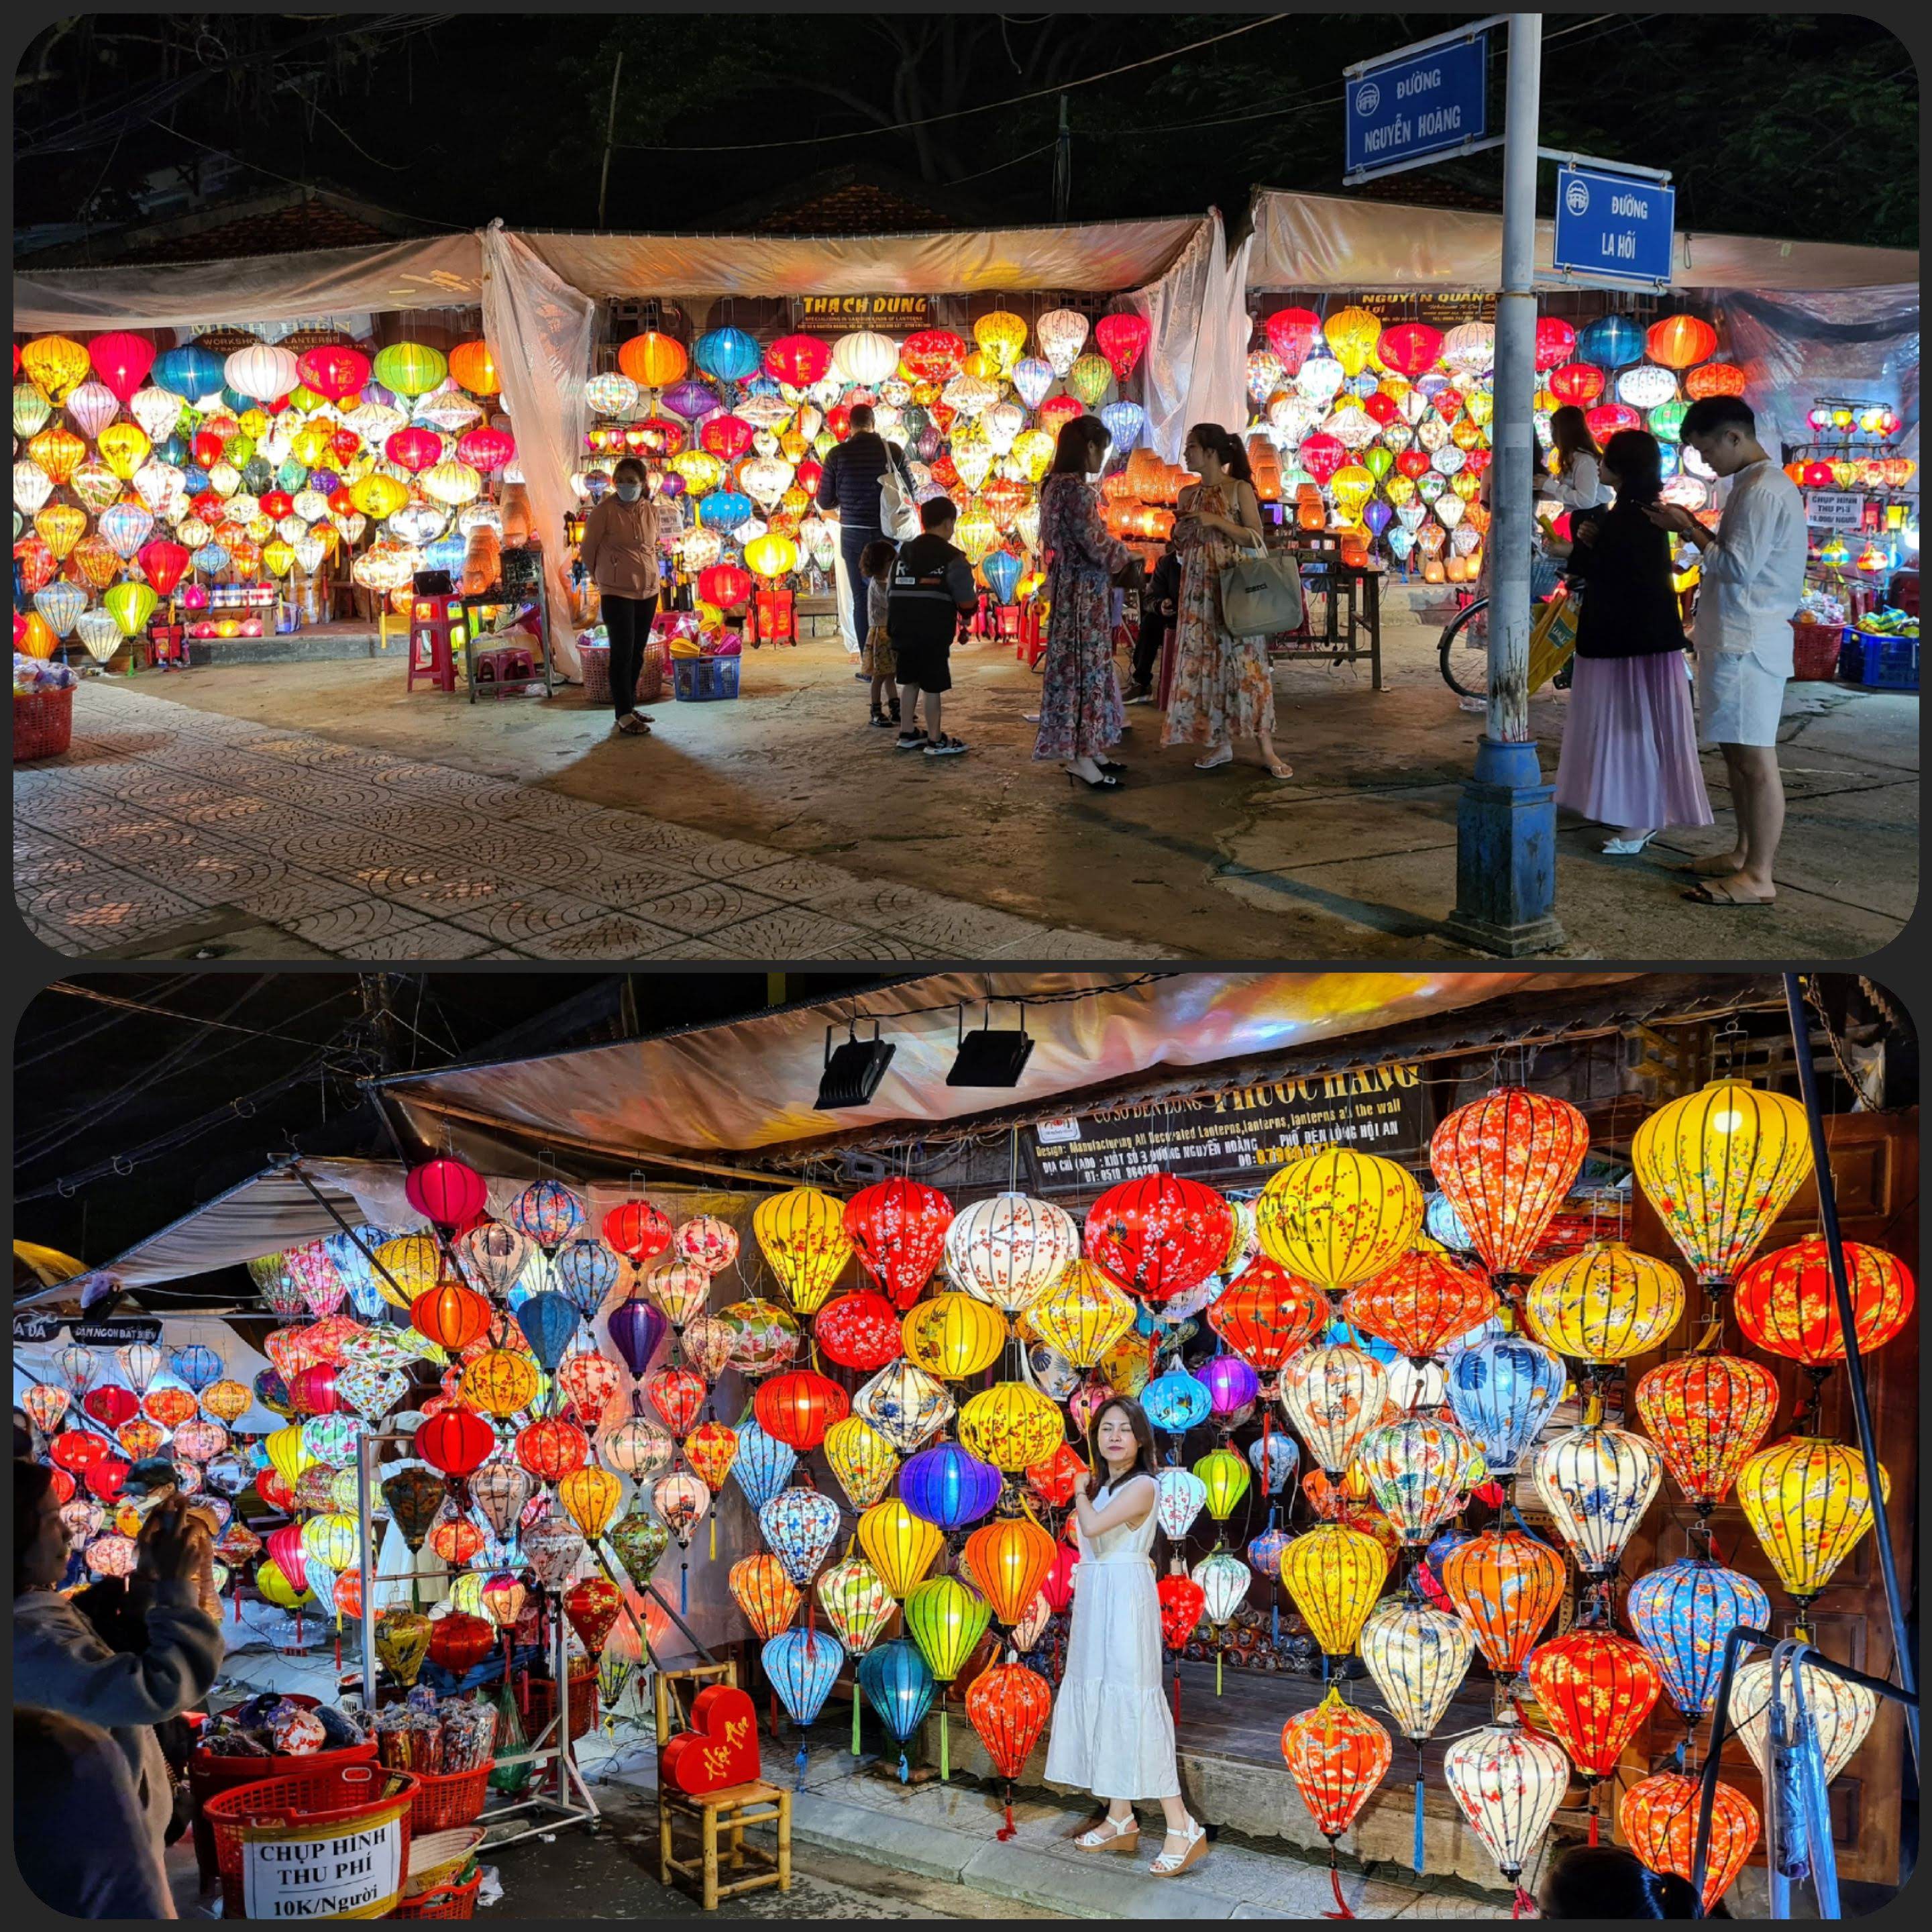 Lantern shops at Nguyen Hoang Night Market in Hoi An Ancient Town, Quang Nam Province, Vietnam. Visitors can take photos of themselves with the lanterns for VND10,000 (US$0.4) per person. Photo: Duy Khang / Tuoi Tre